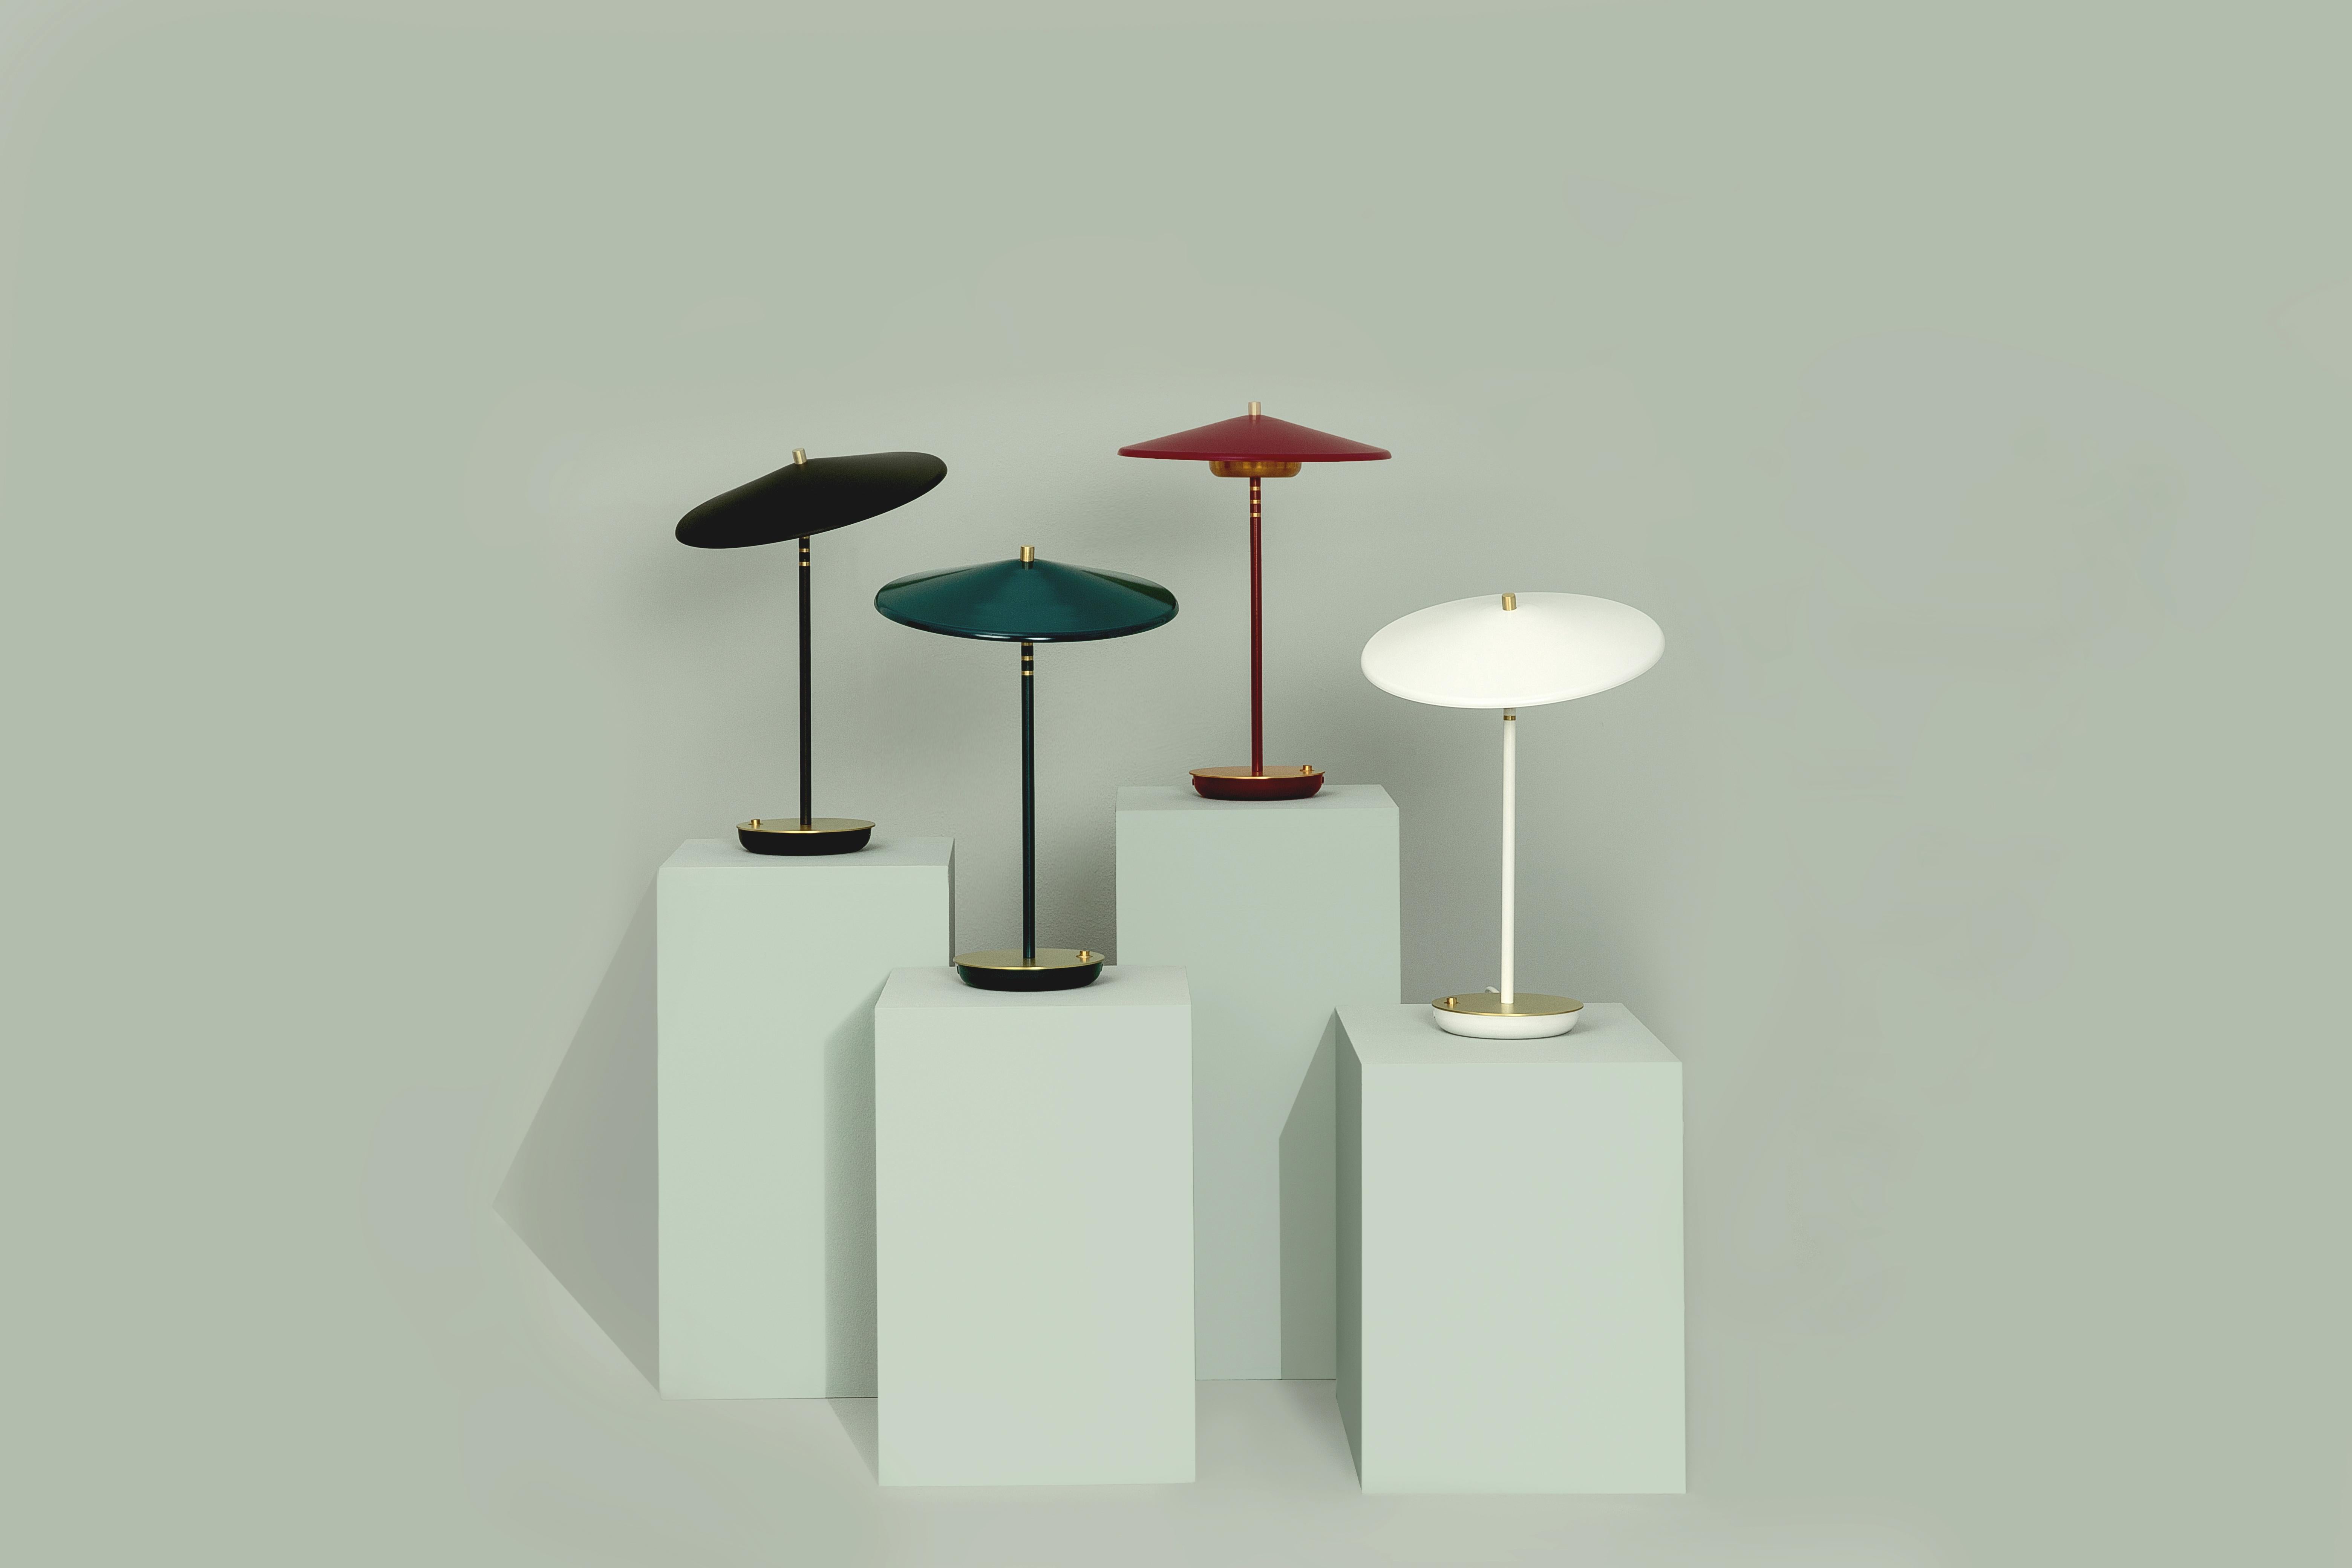 Hand-Crafted Artist Table Lamp, Gold and Sacramento Green, Tilting Shader